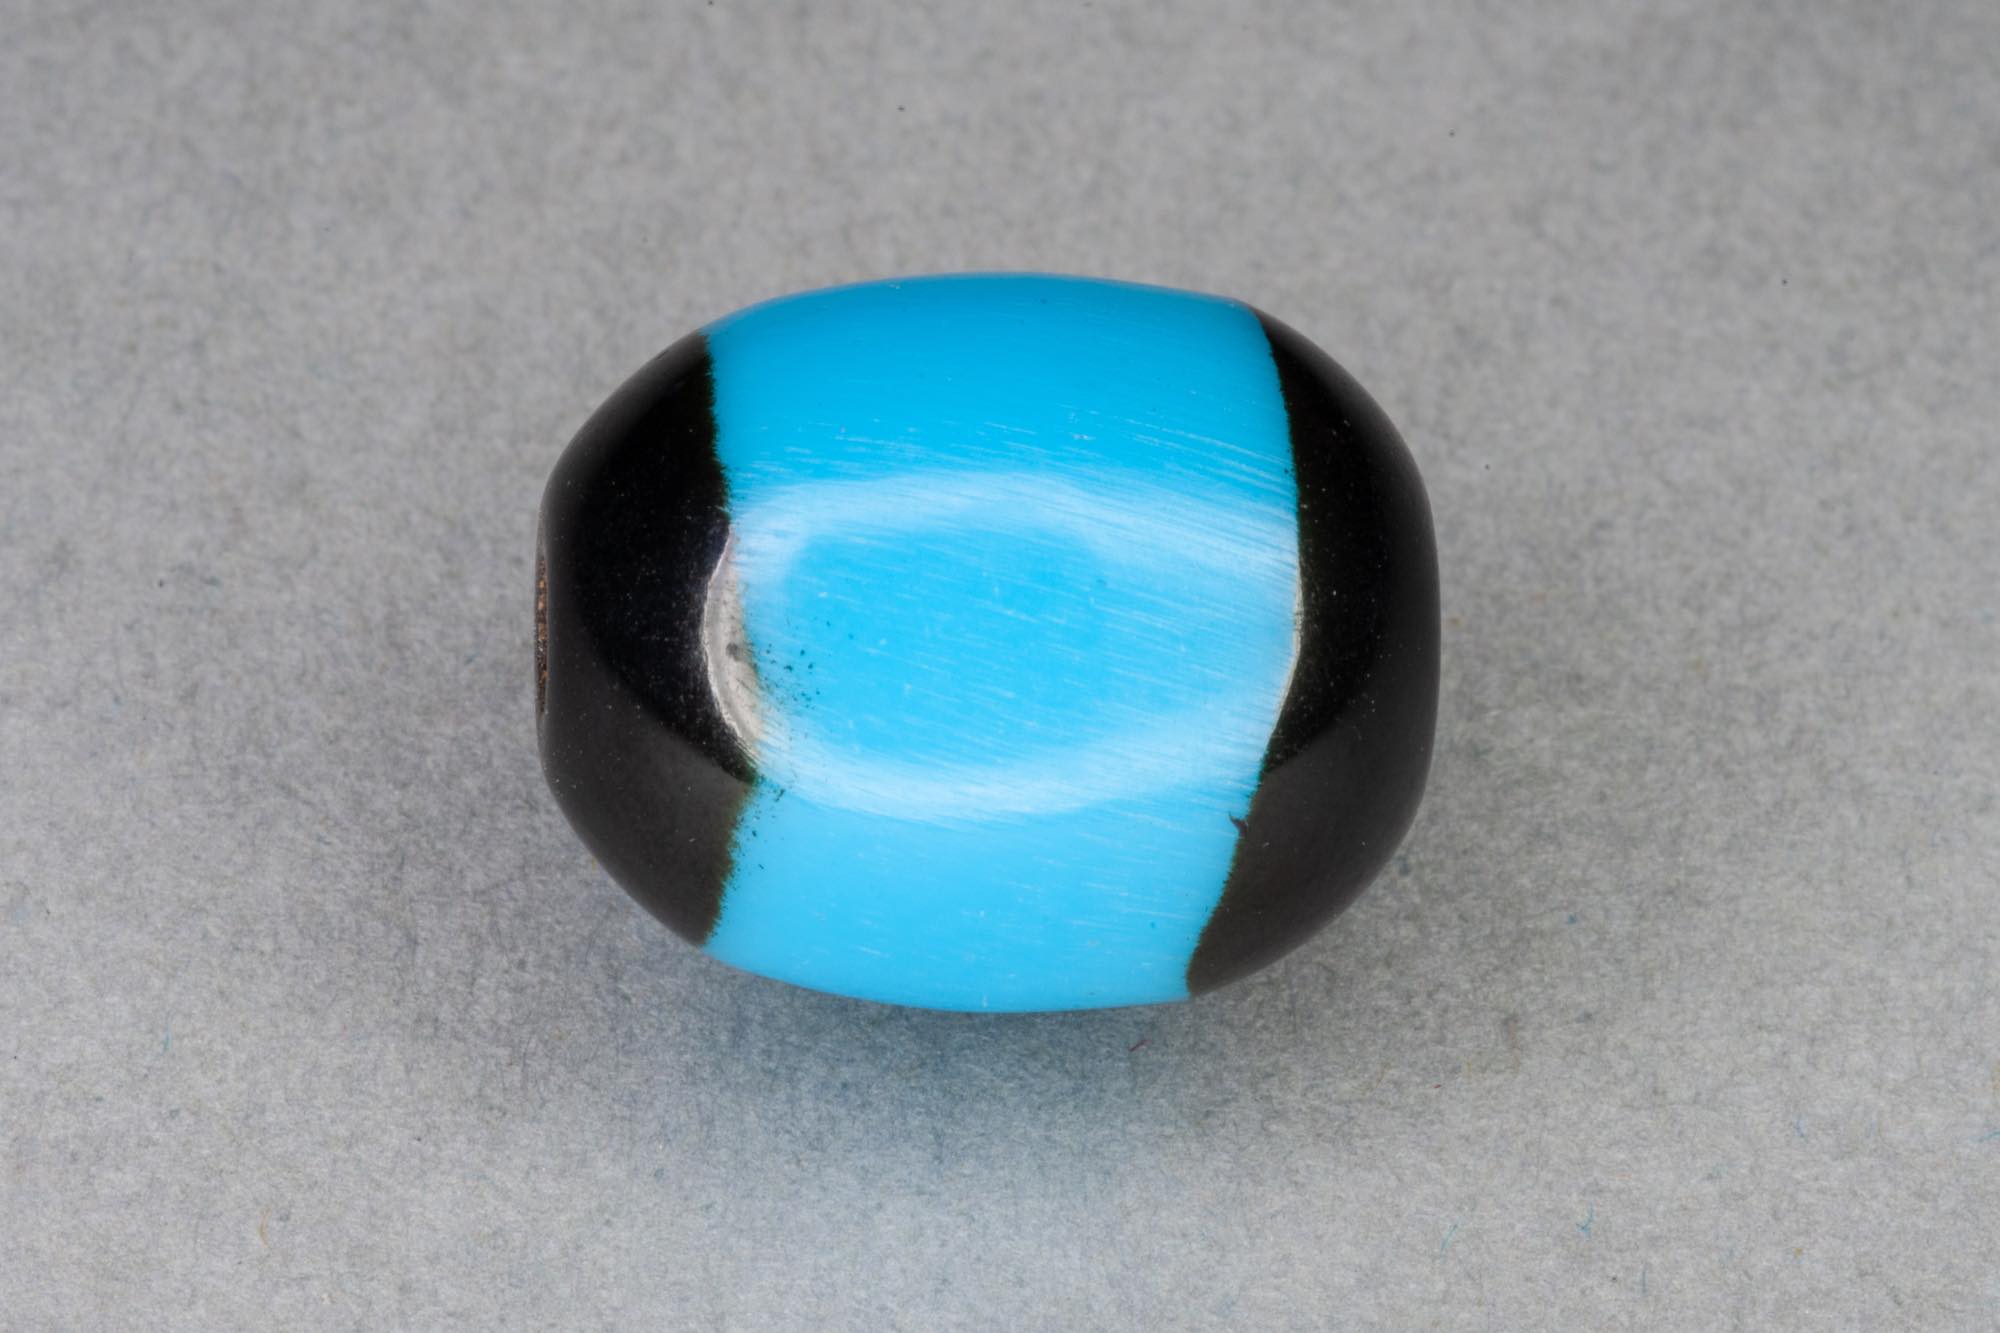 Blue Oval Resin Bead With Black Ends, 14x11mm, 1.5mm hole